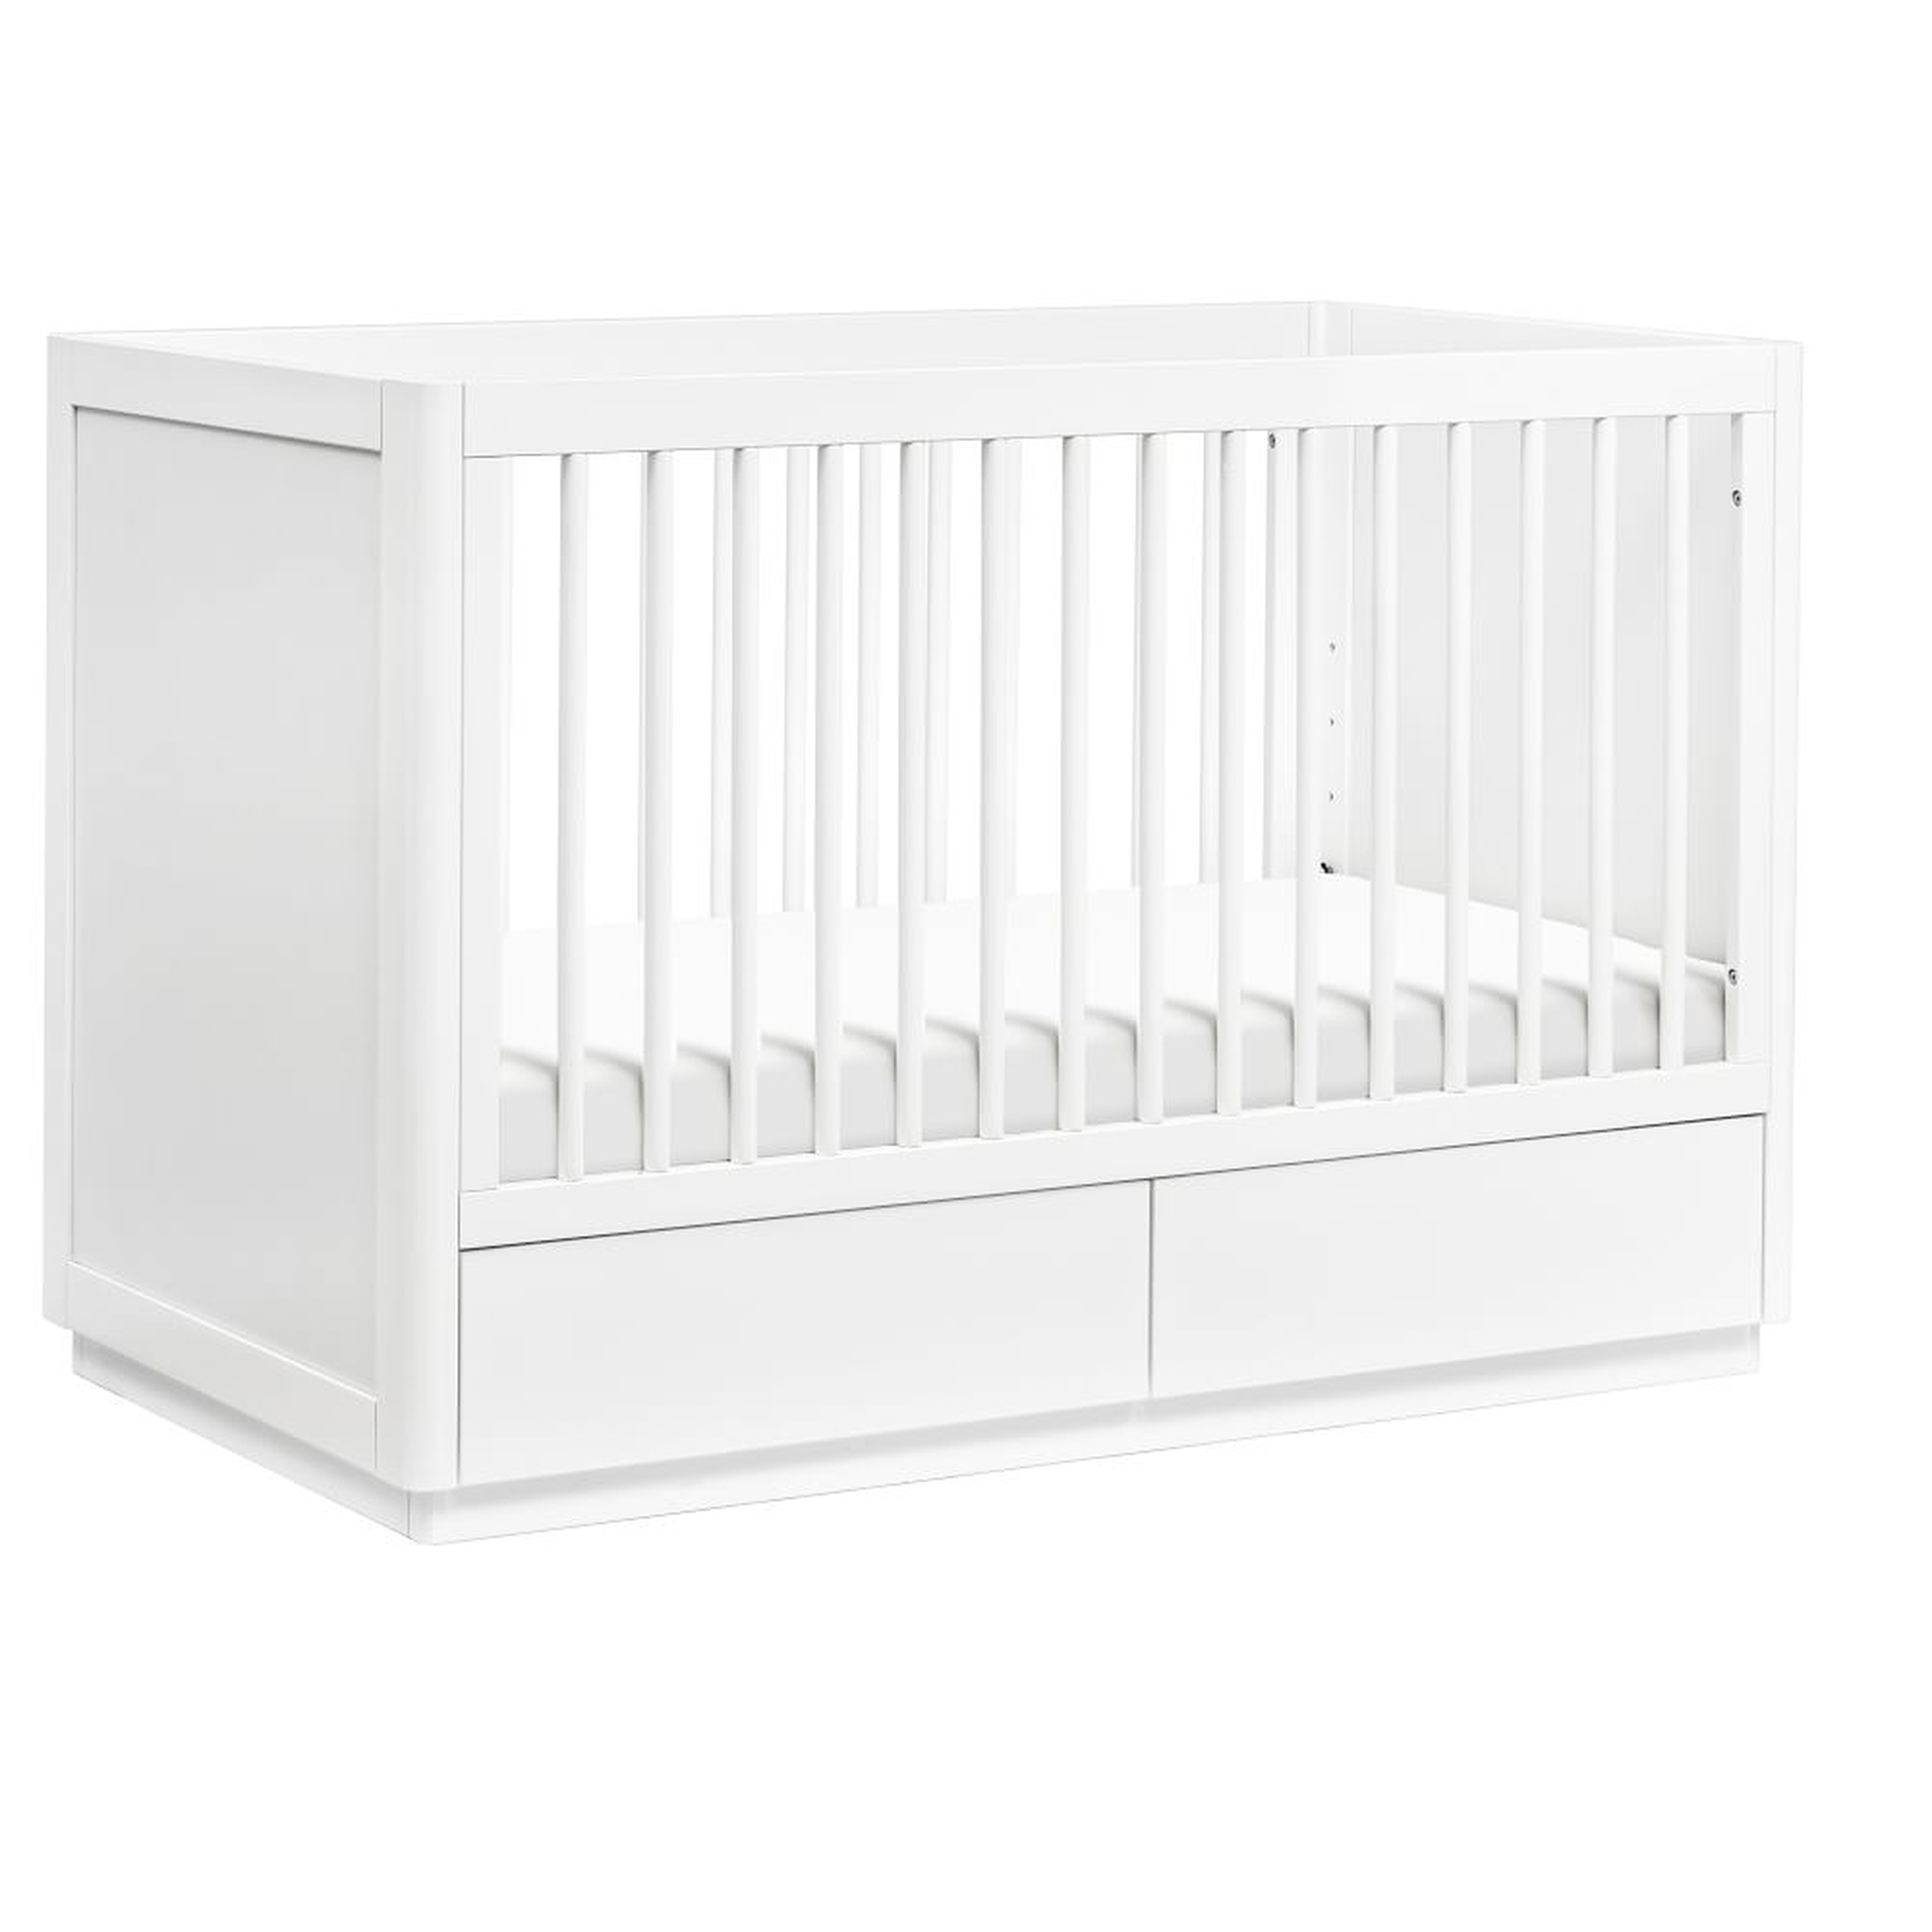 Bento 3-in-1 Convertible Storage Crib with Toddler Bed Conversion Kit, White, WE Kids - West Elm